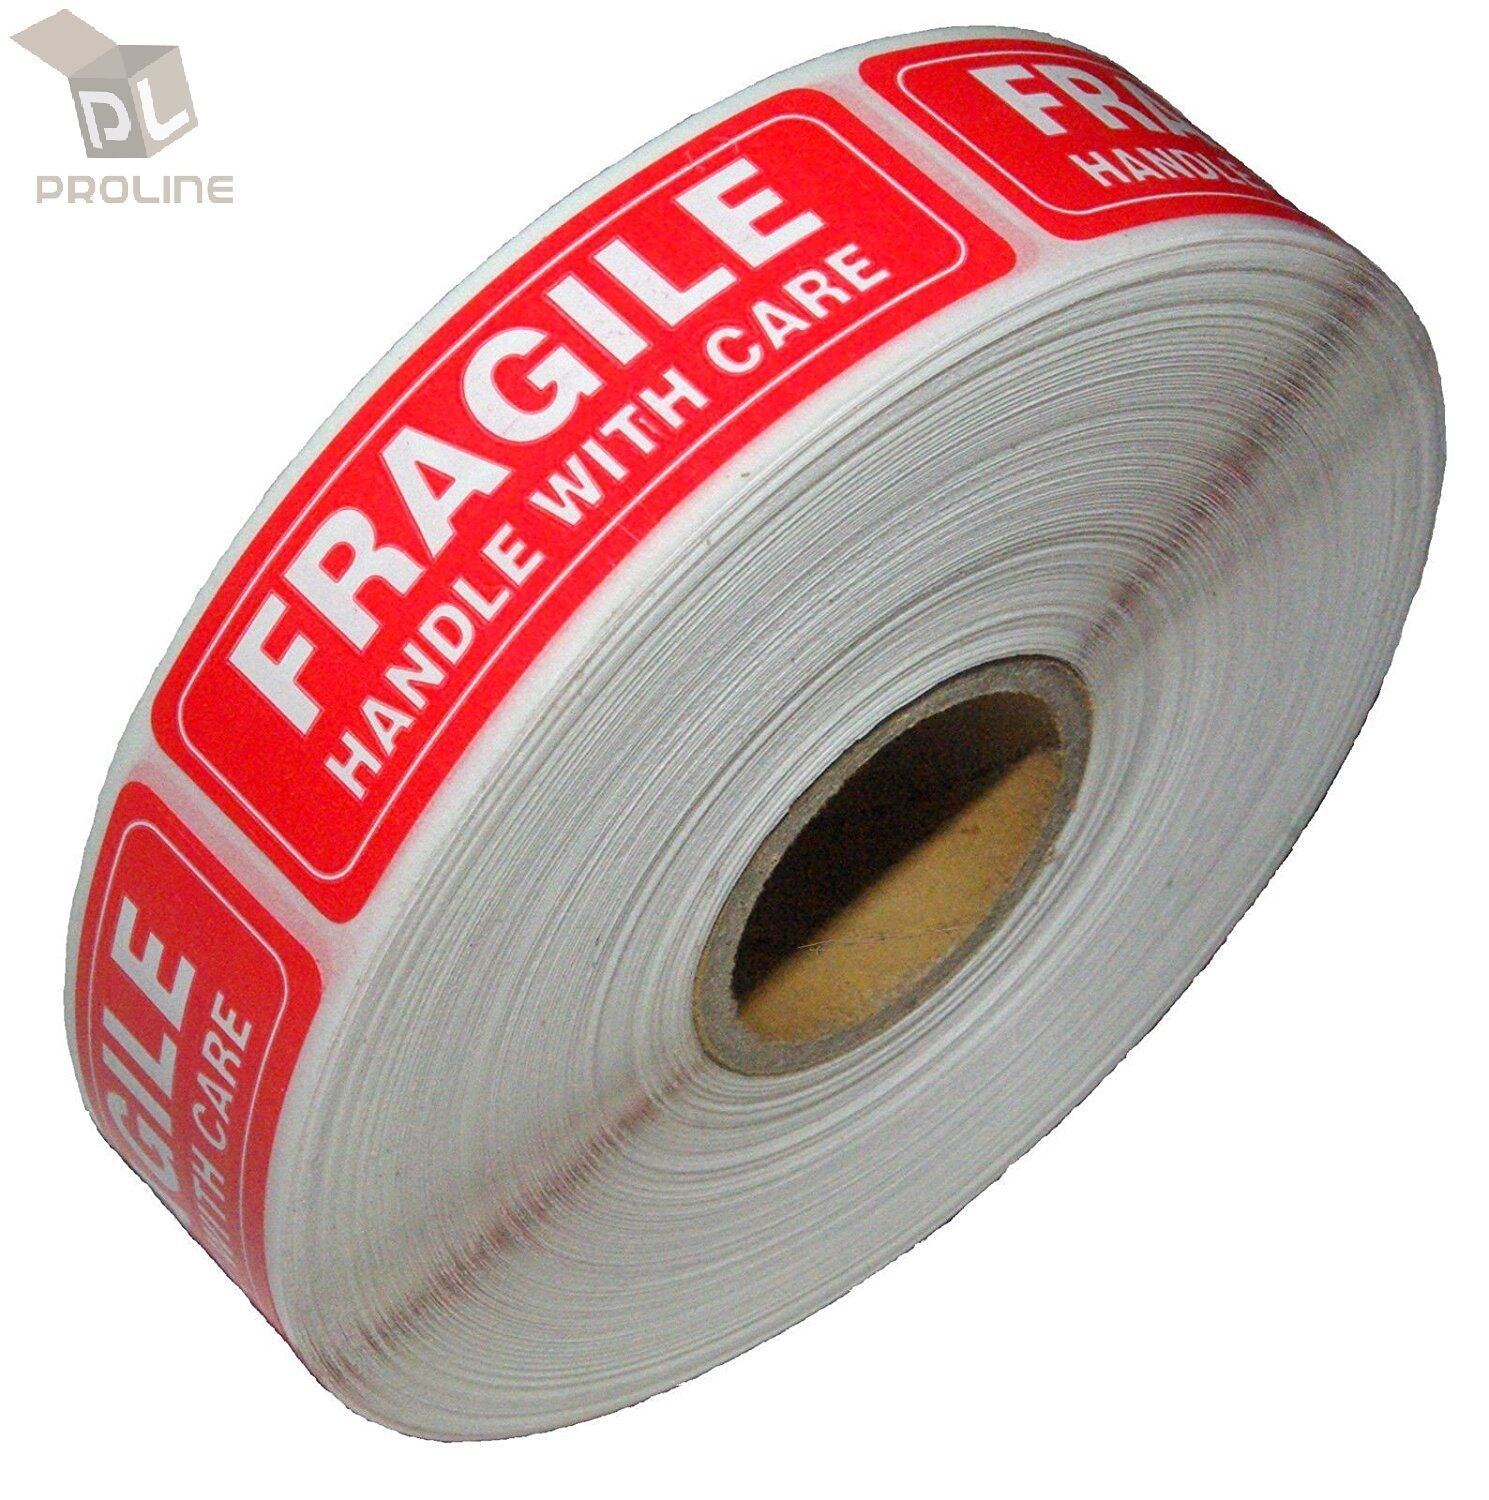 1 Roll 1000 1 X 3 Fragile Handle With Care Stickers Labels, Easy Peel And Apply